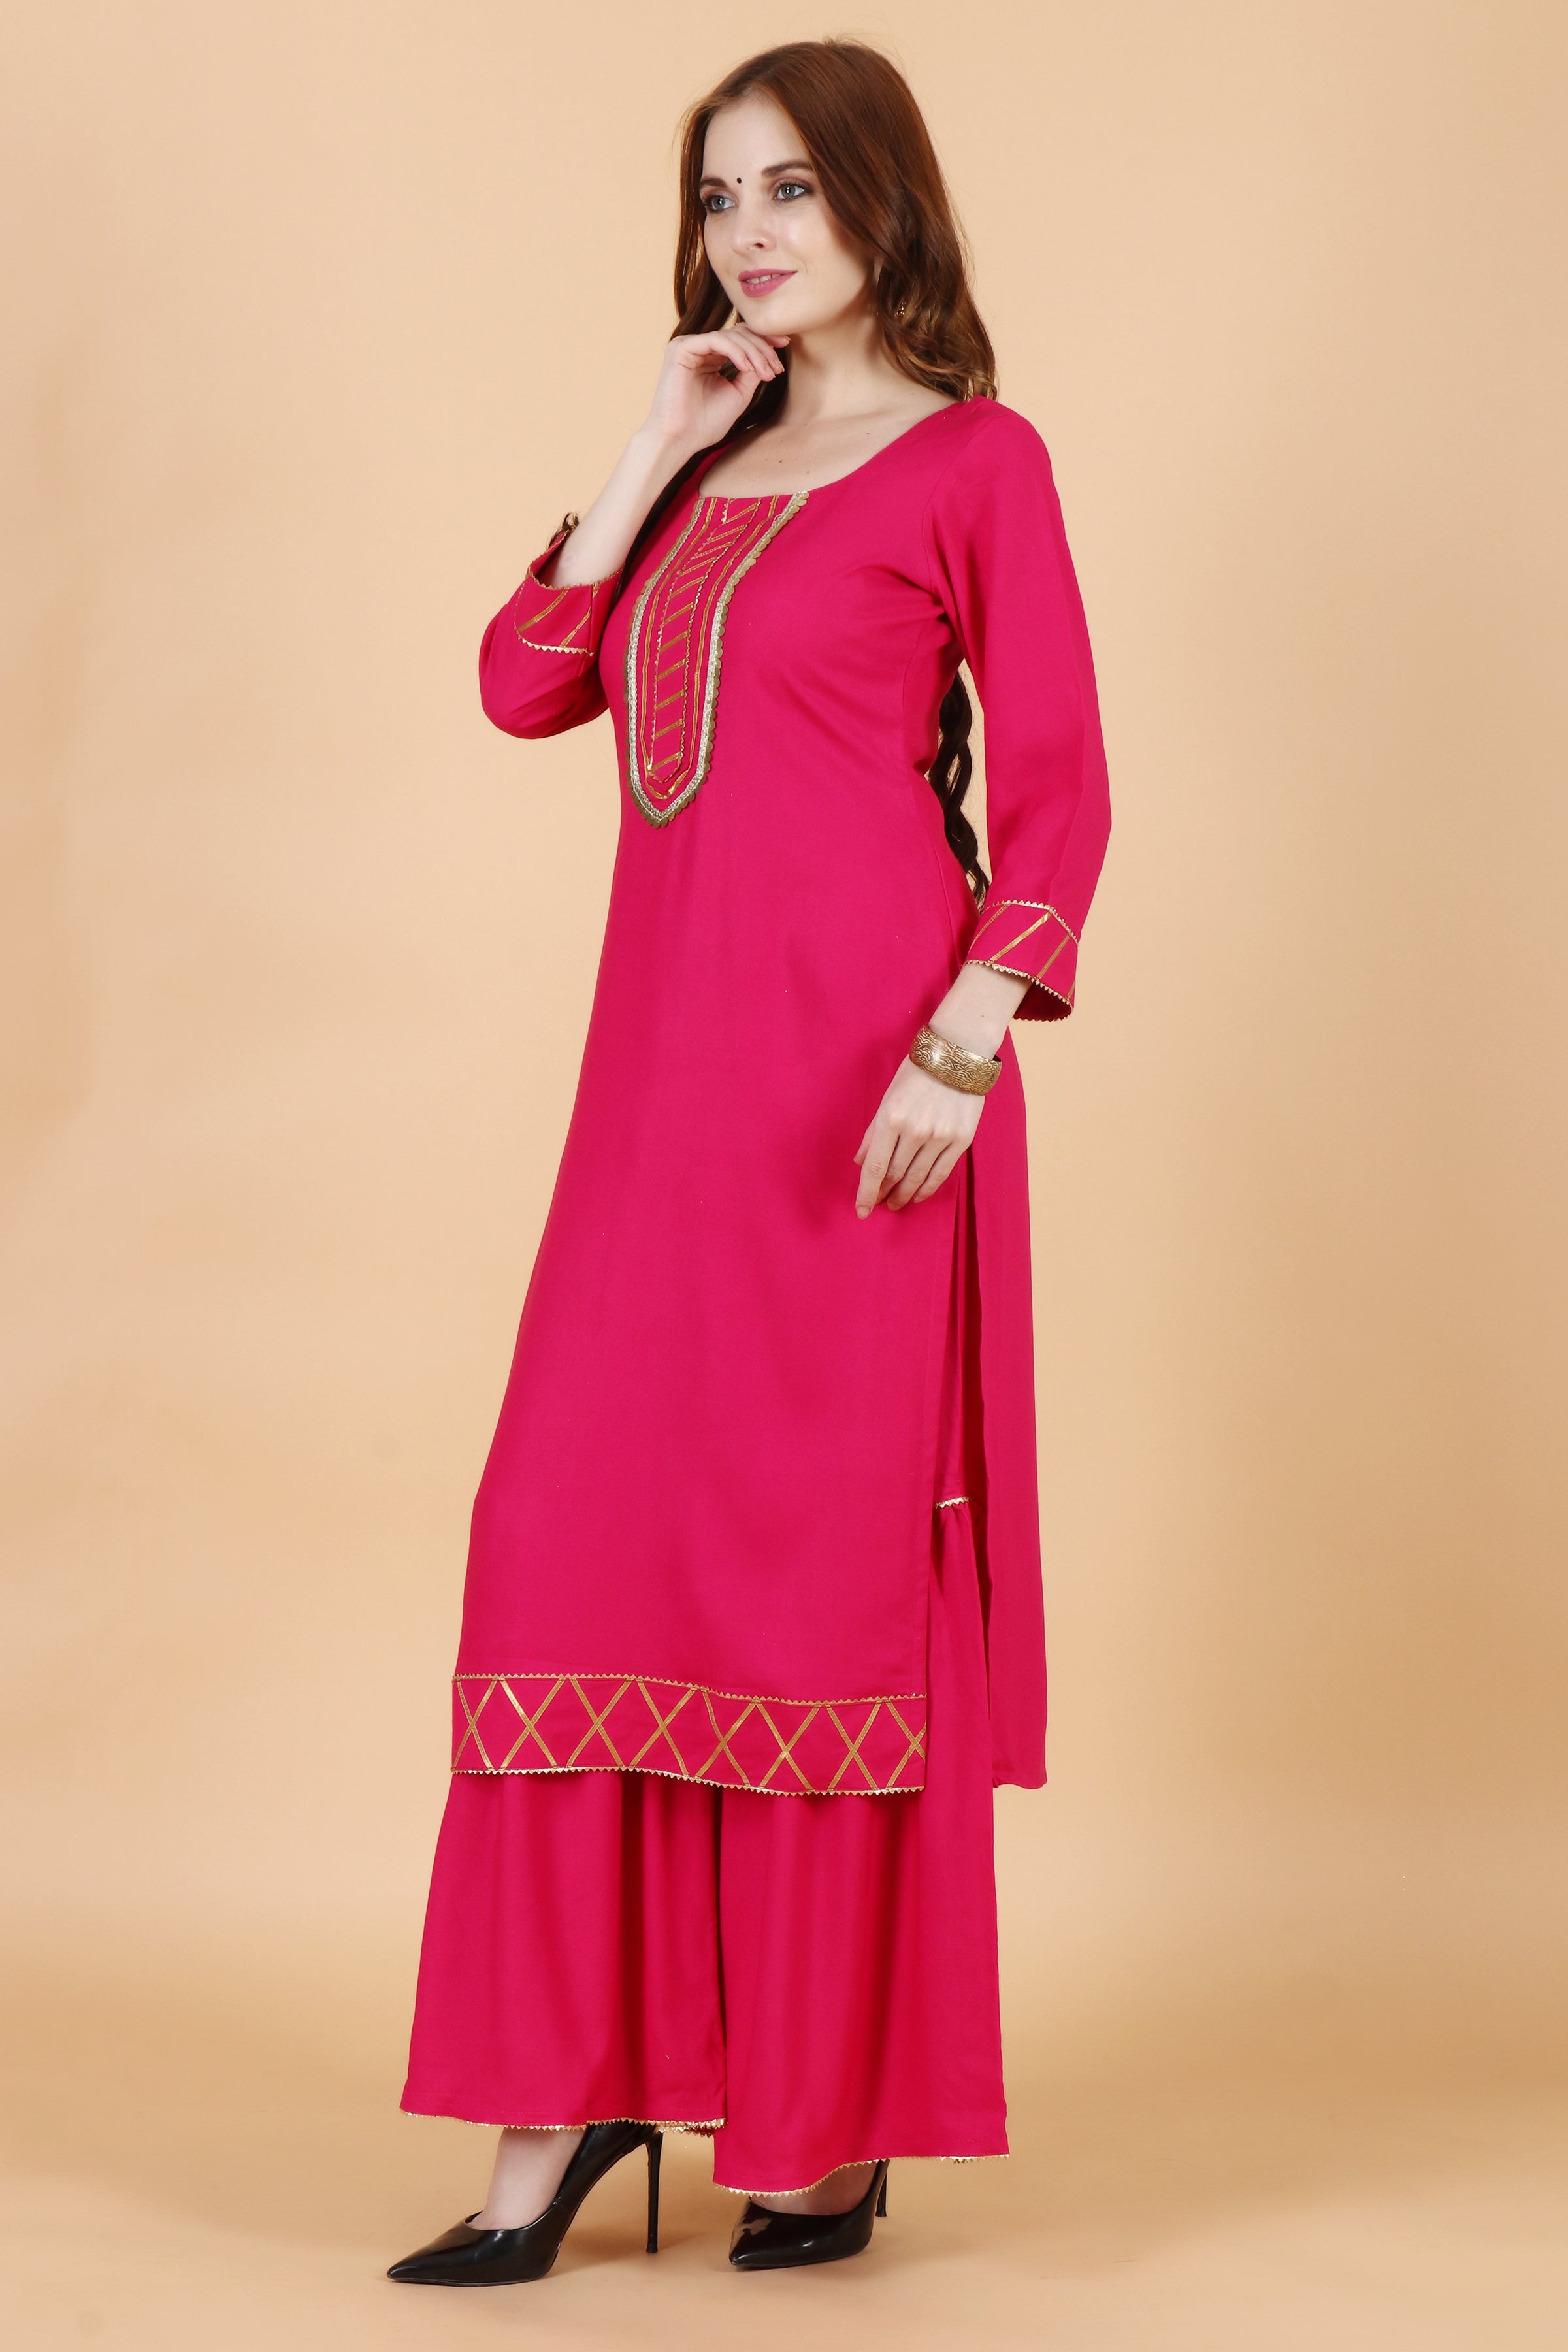 PINKPARI Plain Georgette Sharara Suit with Organza Dupatta at Rs.550/Piece  in surat offer by Golaviya House